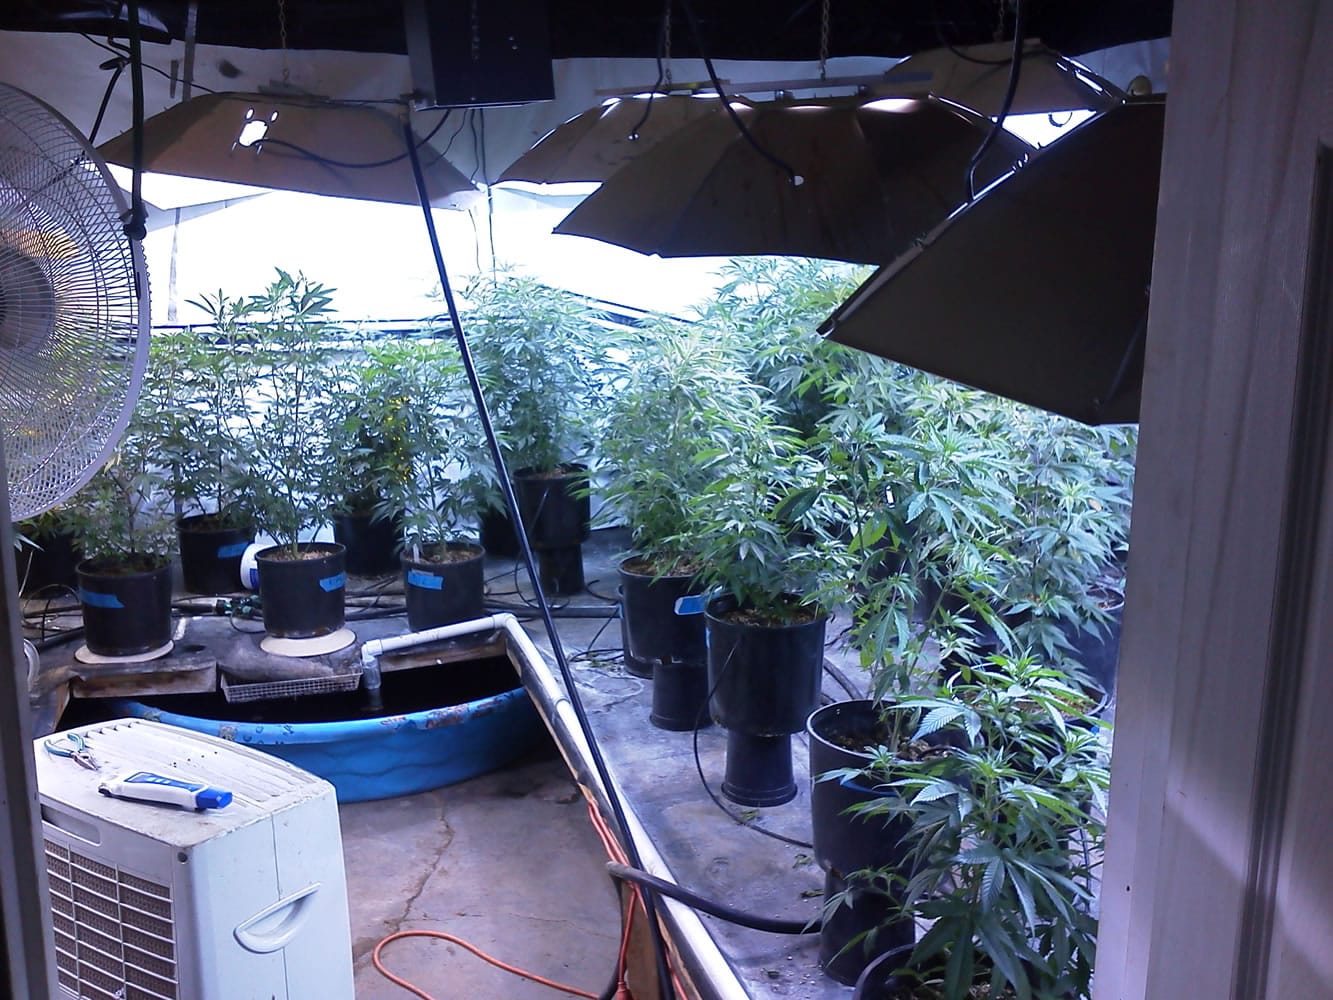 Officers with the Clark County Sheriff's Office Tactical Detective Unit and the Clark-Vancouver Regional Drug Task Force discovered an alleged illegal marijuana dispensary while conducting a warrant search of a house at 10509 N.E. 124th Ave.